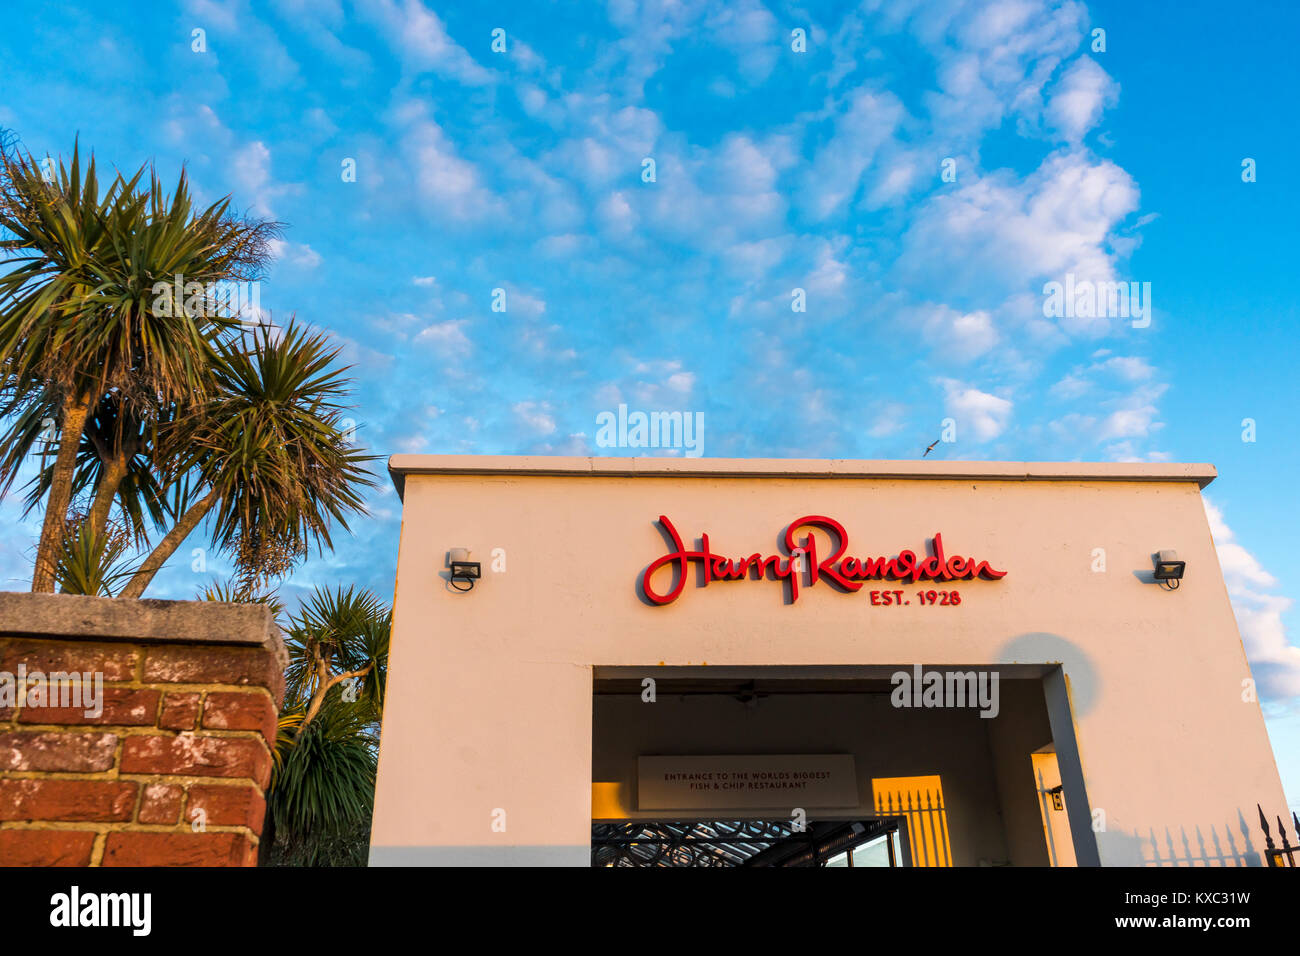 The Harry Ramsden Fish and Chips Restaurant at Bournemouth seafront during evening light against blue sky in January 2018, Dorset, England, UK Stock Photo